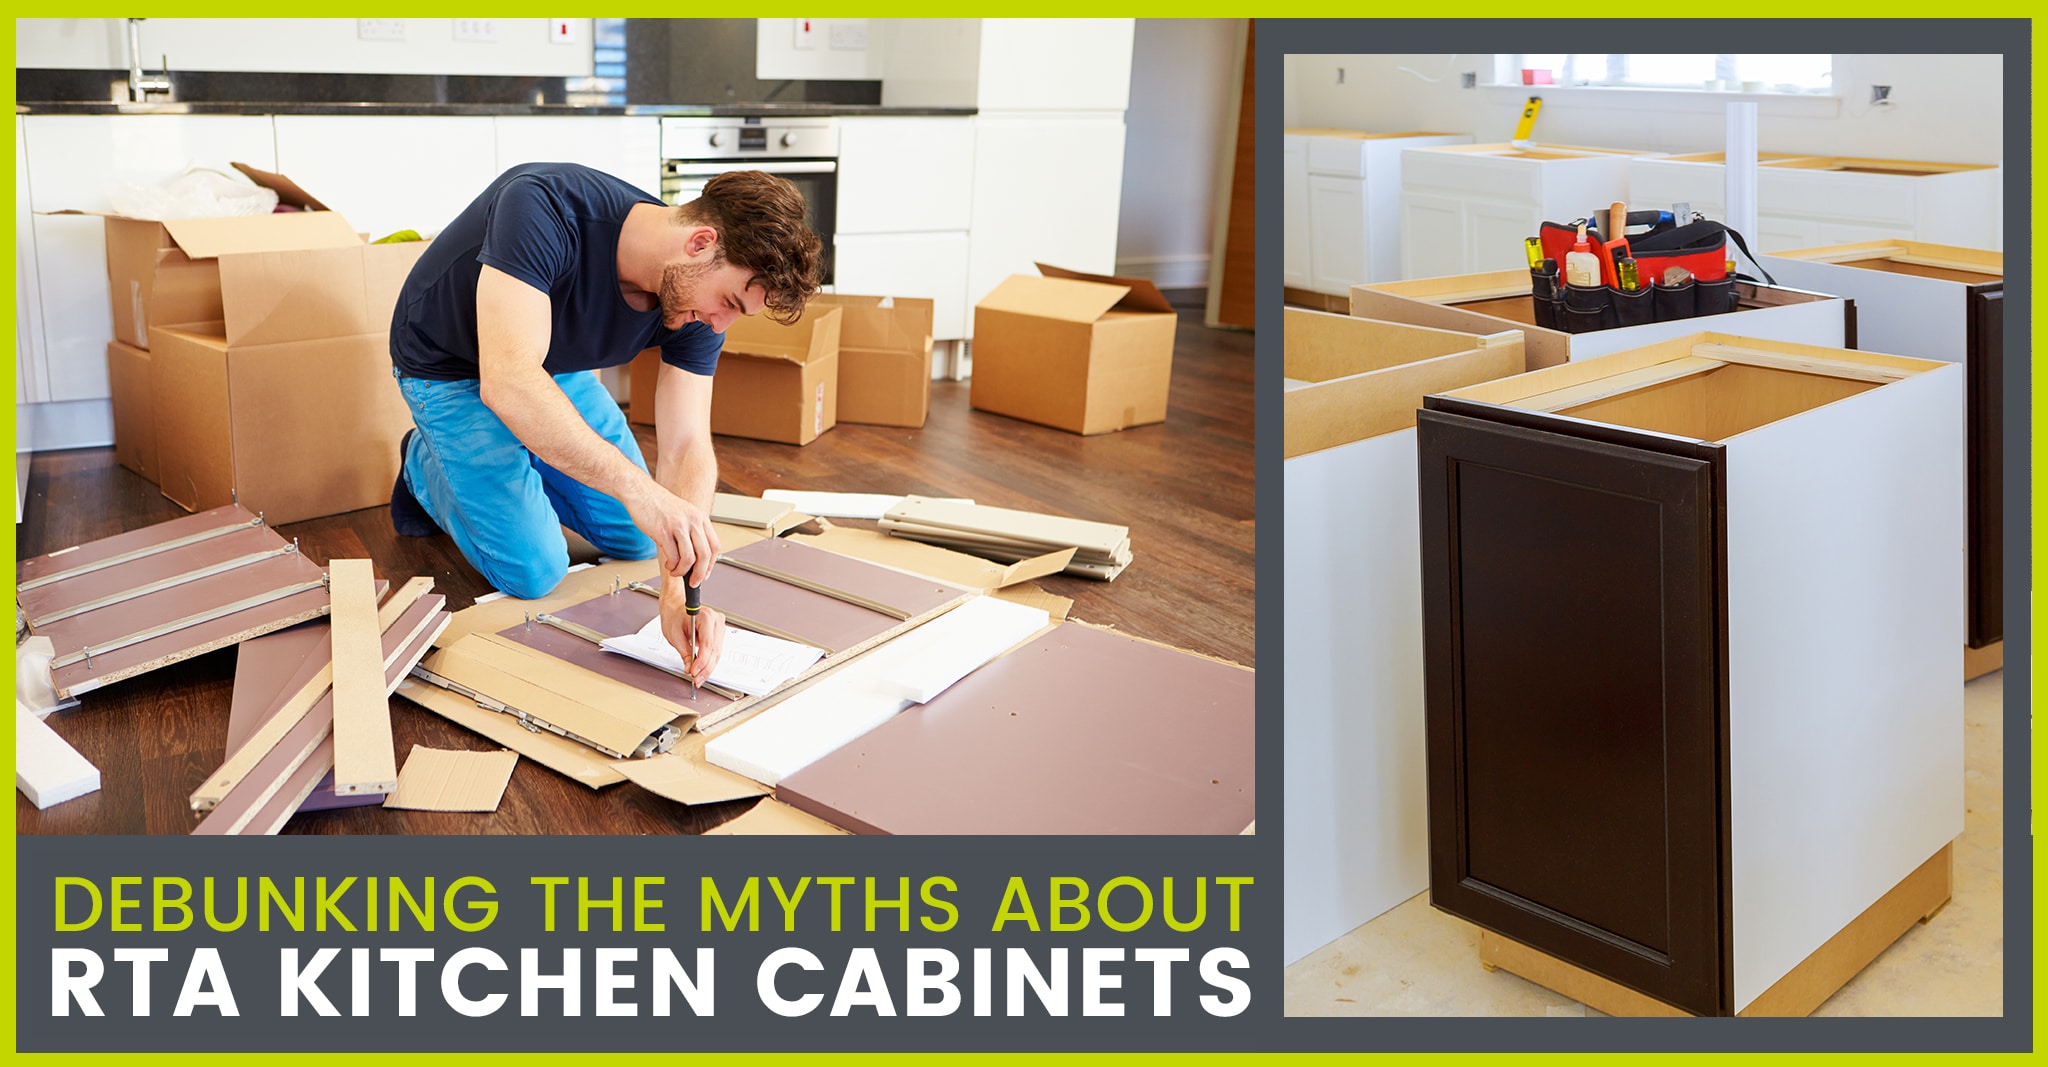 Myths about RTA Cabinets